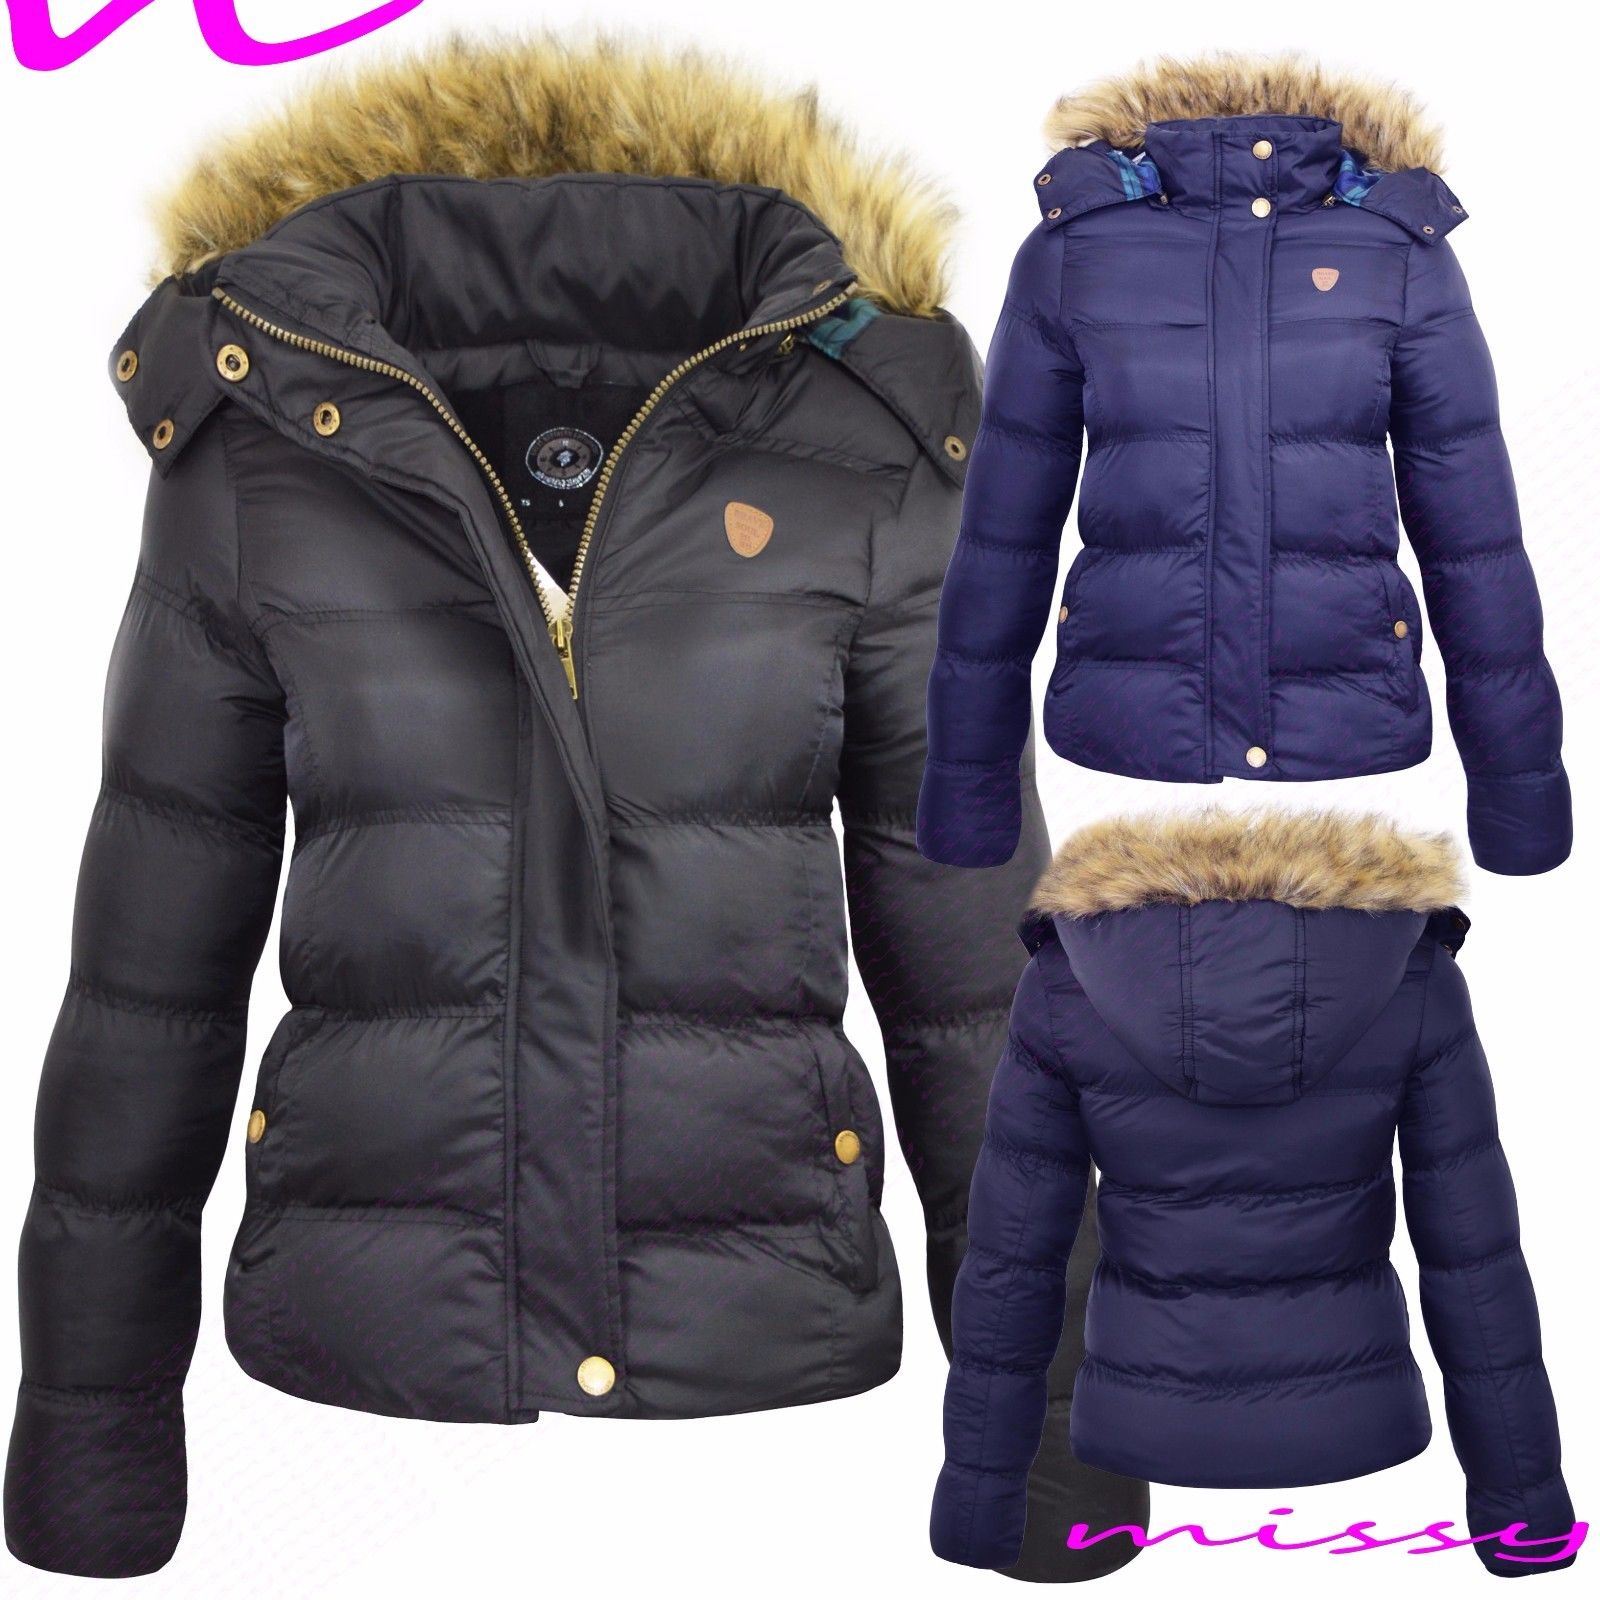 NEW WOMENS LADIES QUILTED WINTER COAT PUFFER FUR COLLAR HOODED JACKET PARKA SIZE